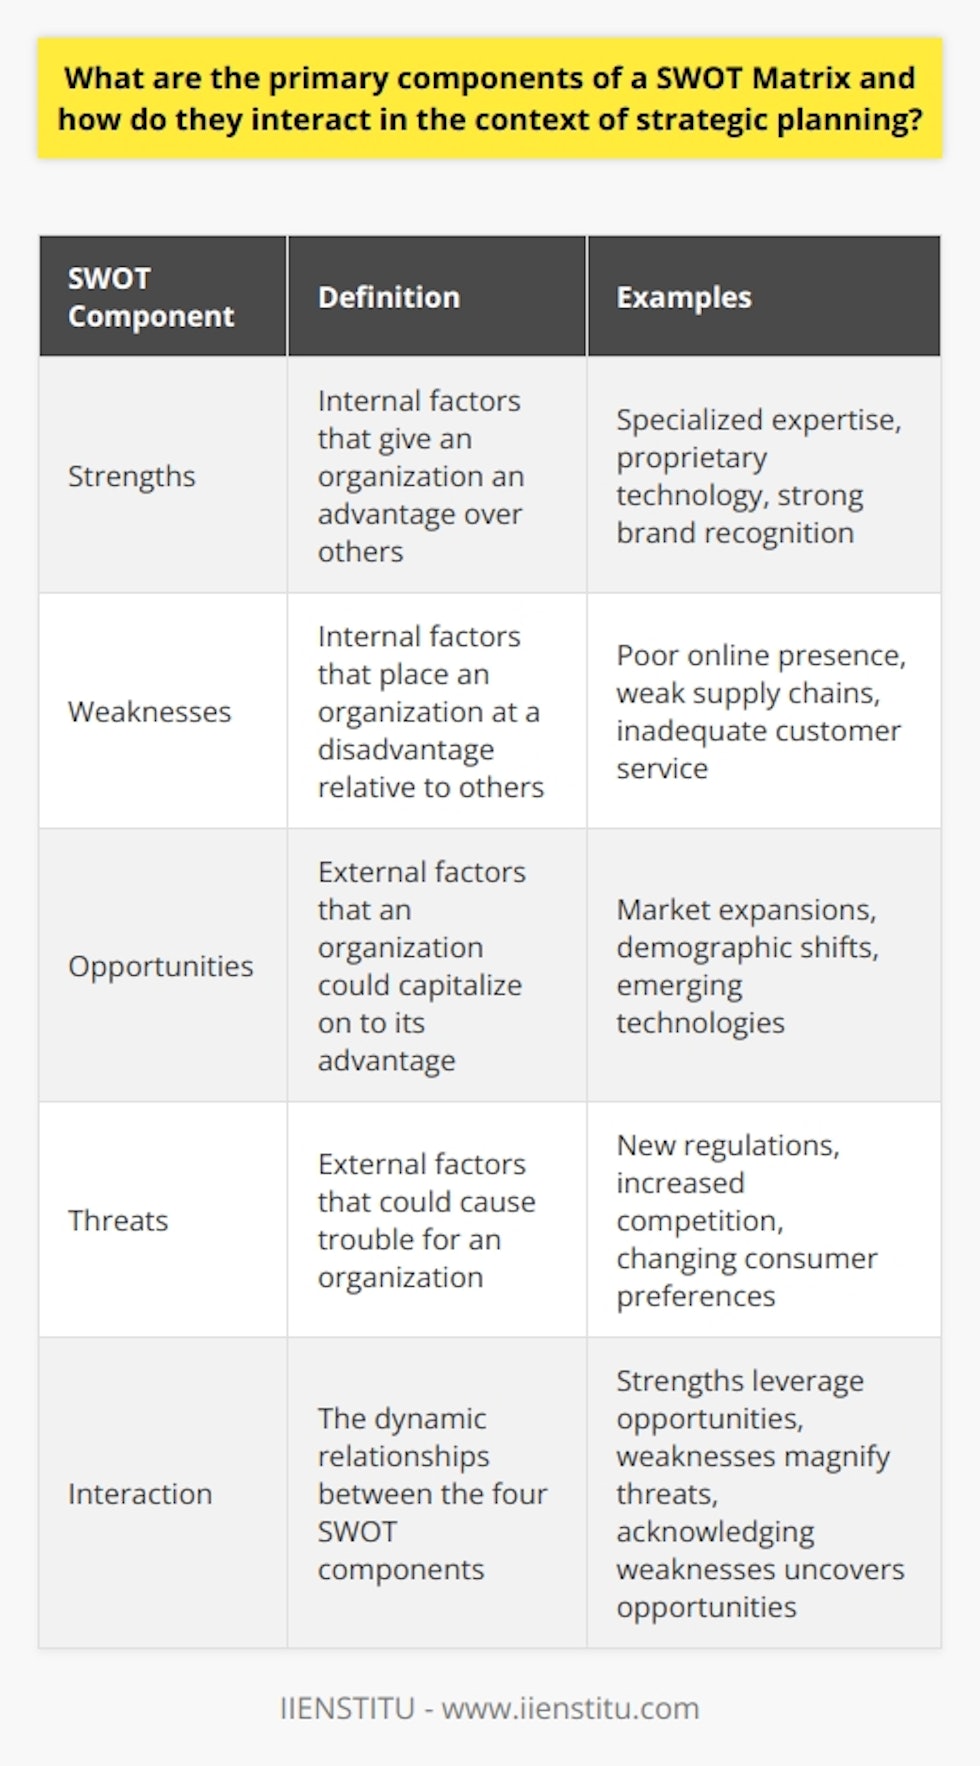 Understanding SWOT The SWOT matrix forms a key part of strategic planning. It provides a straightforward framework. Analysts and managers rely on it frequently. To understand its primary components, lets delve deeper. The Four Quadrants of SWOT At its core, the SWOT matrix has four distinct quadrants. They interact dynamically. This interaction informs an organizations strategic direction. Strengths  and  weaknesses  represent internal factors. They are within an organization’s control. Strengths could include specialized expertise or proprietary technology. Weaknesses might be poor online presence or weak supply chains. Opportunities  and  threats  embody external factors. These lie outside of direct control. Opportunities can be market expansions or demographic shifts. Threats might include new regulations or increased competition. The matrix demands a close examination of these elements. This examination highlights how one component may influence another. Interaction within SWOT Interactions within the SWOT matrix reveal complex relationships. Strengths leverage opportunities . Effective use of strengths enables capitalization on opportunities. A robust R&D department, for example, can exploit emerging technologies. Conversely,  strengths mitigate threats . Strong brand recognition can off-set competitive challenges. The stronger the strengths, the less impact threats will likely have. Weaknesses, when ignored, magnify threats . A weak online presence leaves a company vulnerable in a digital age.  However,  acknowledging weaknesses can uncover opportunities . Identifying poor customer service can lead to enhanced training programs. Each component does not operate in isolation. They provide a comprehensive view of the current strategic position. Strategic Planning with SWOT Strategic planning with SWOT requires a careful balance. It involves prioritizing actions based on the matrixs insights. - Maximize strengths - Address weaknesses - Seize opportunities - Minimize threats Integration and balance are key. They ensure that strategies are well-rounded and robust. SWOT analyses lead to informed decision-making. They guide companies through complex business landscapes. Moreover, SWOT promotes proactive rather than reactive strategies.  In closing, the interaction within the SWOT matrix guides strategic planning. It ensures that strategies are not developed in a vacuum. Rather, they consider a myriad of internal and external factors. This, in turn, leads to more successful business outcomes.